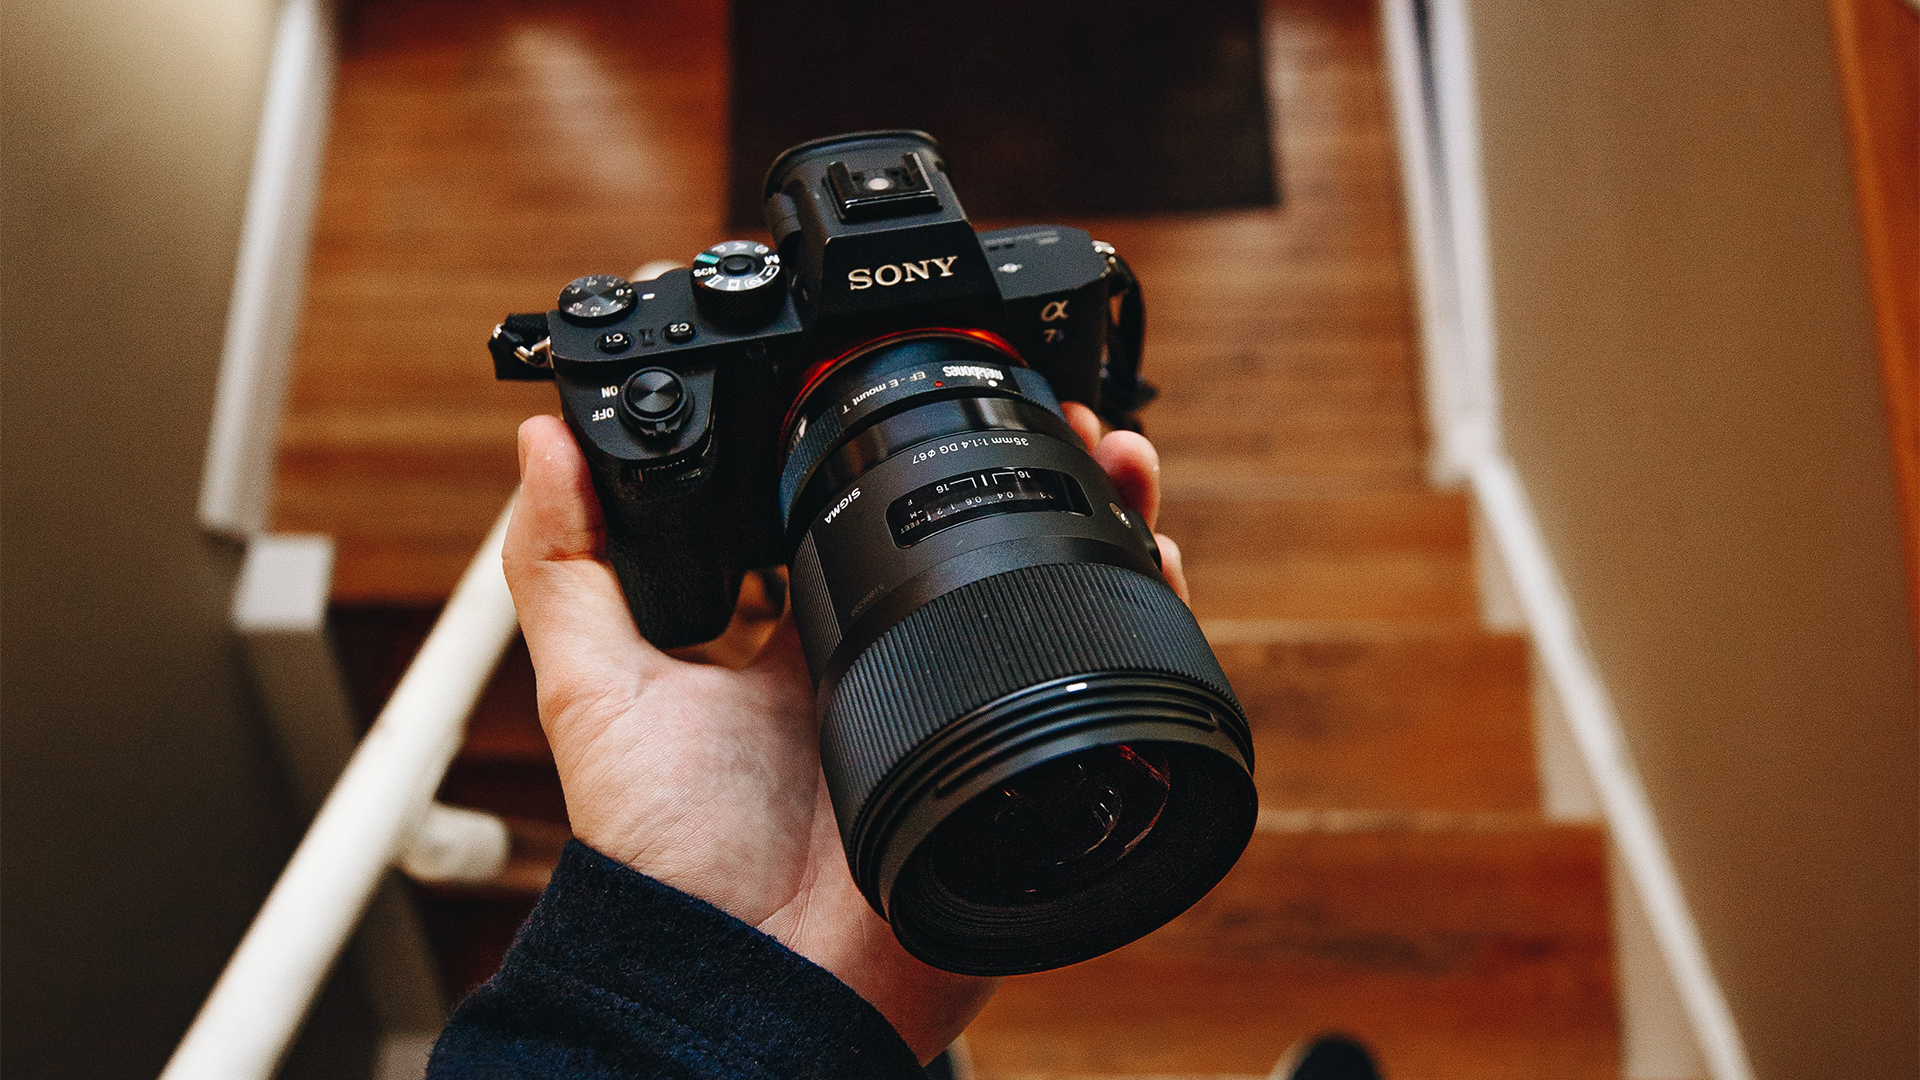 Sony's cameras for vlogging, Professional yet simple vlogs